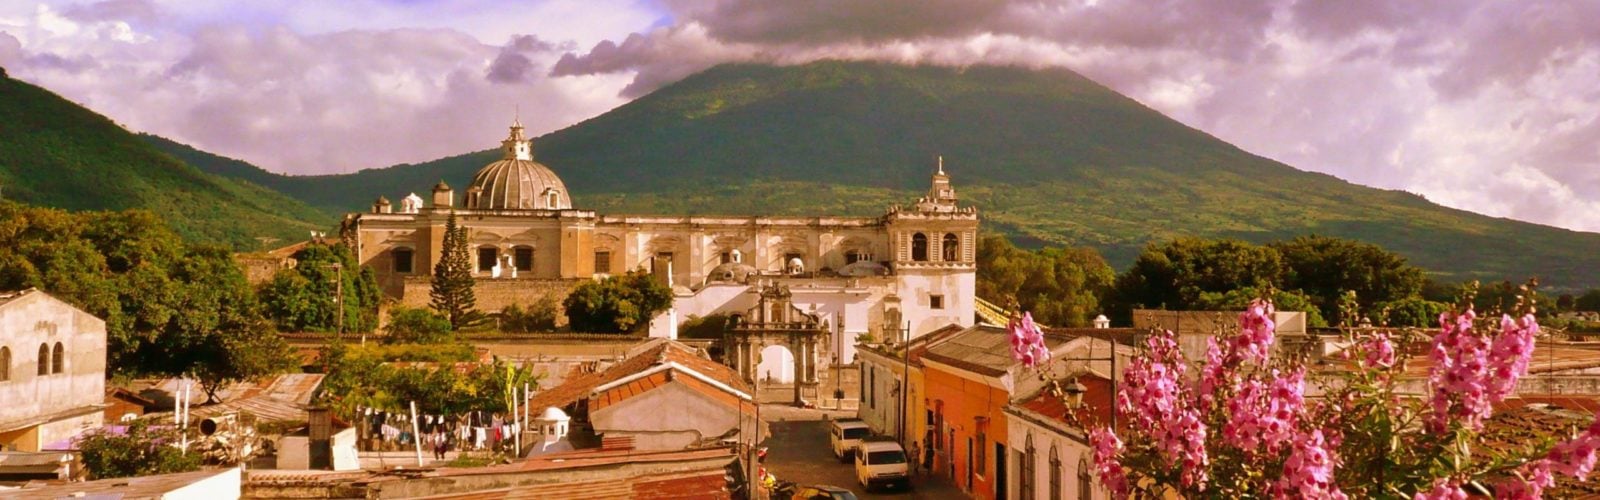 Aerial view of the city of Antigua in Guatemala, framed by pink spring flowers and dramatic mountains